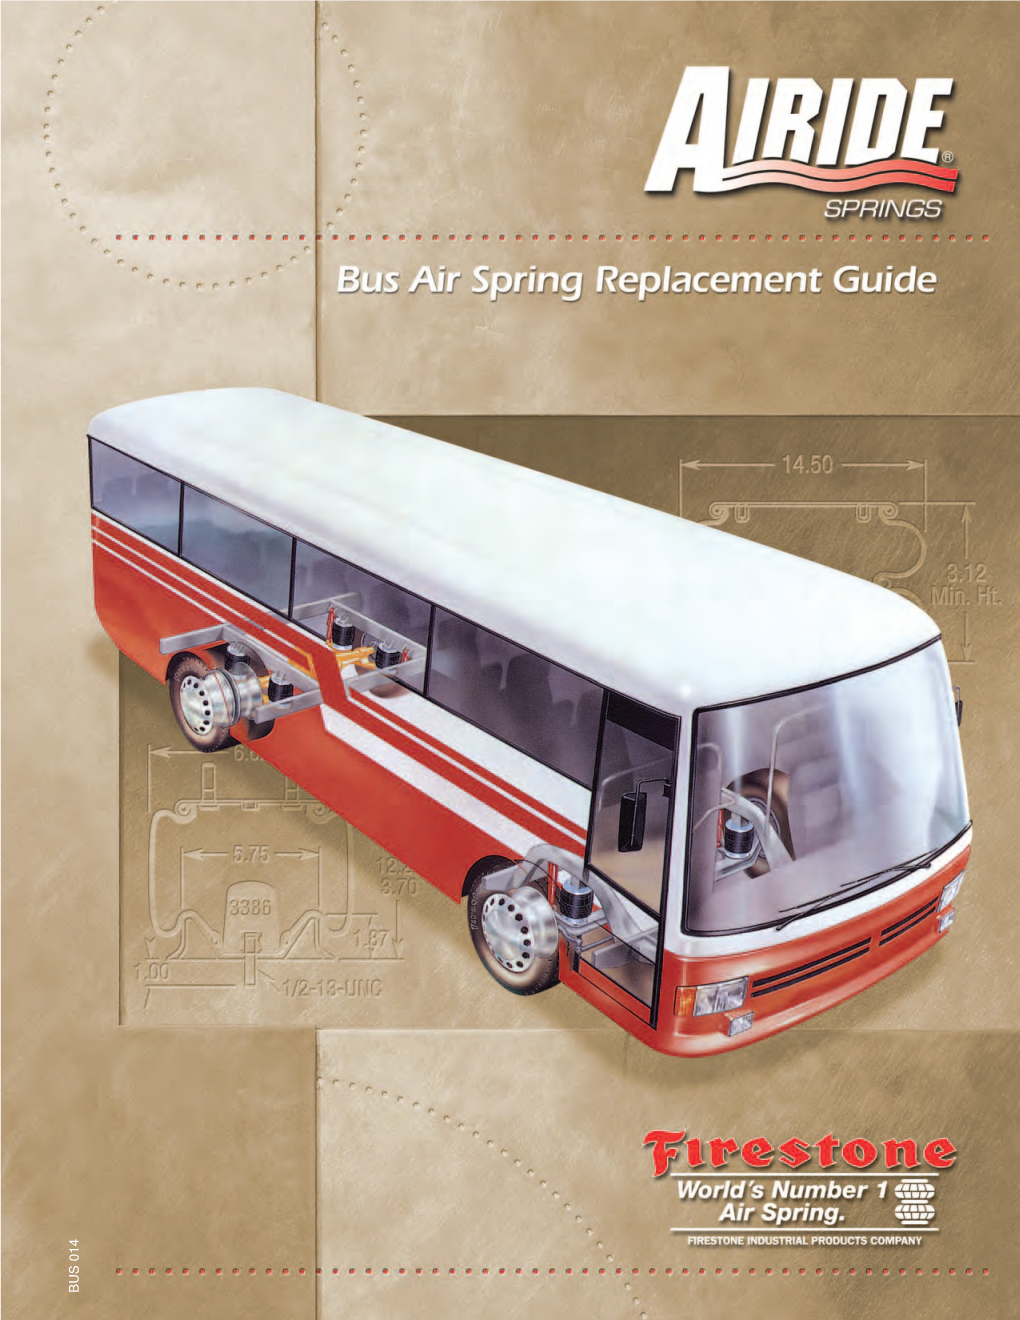 Firestone® Bus Air Spring Replacement Guide